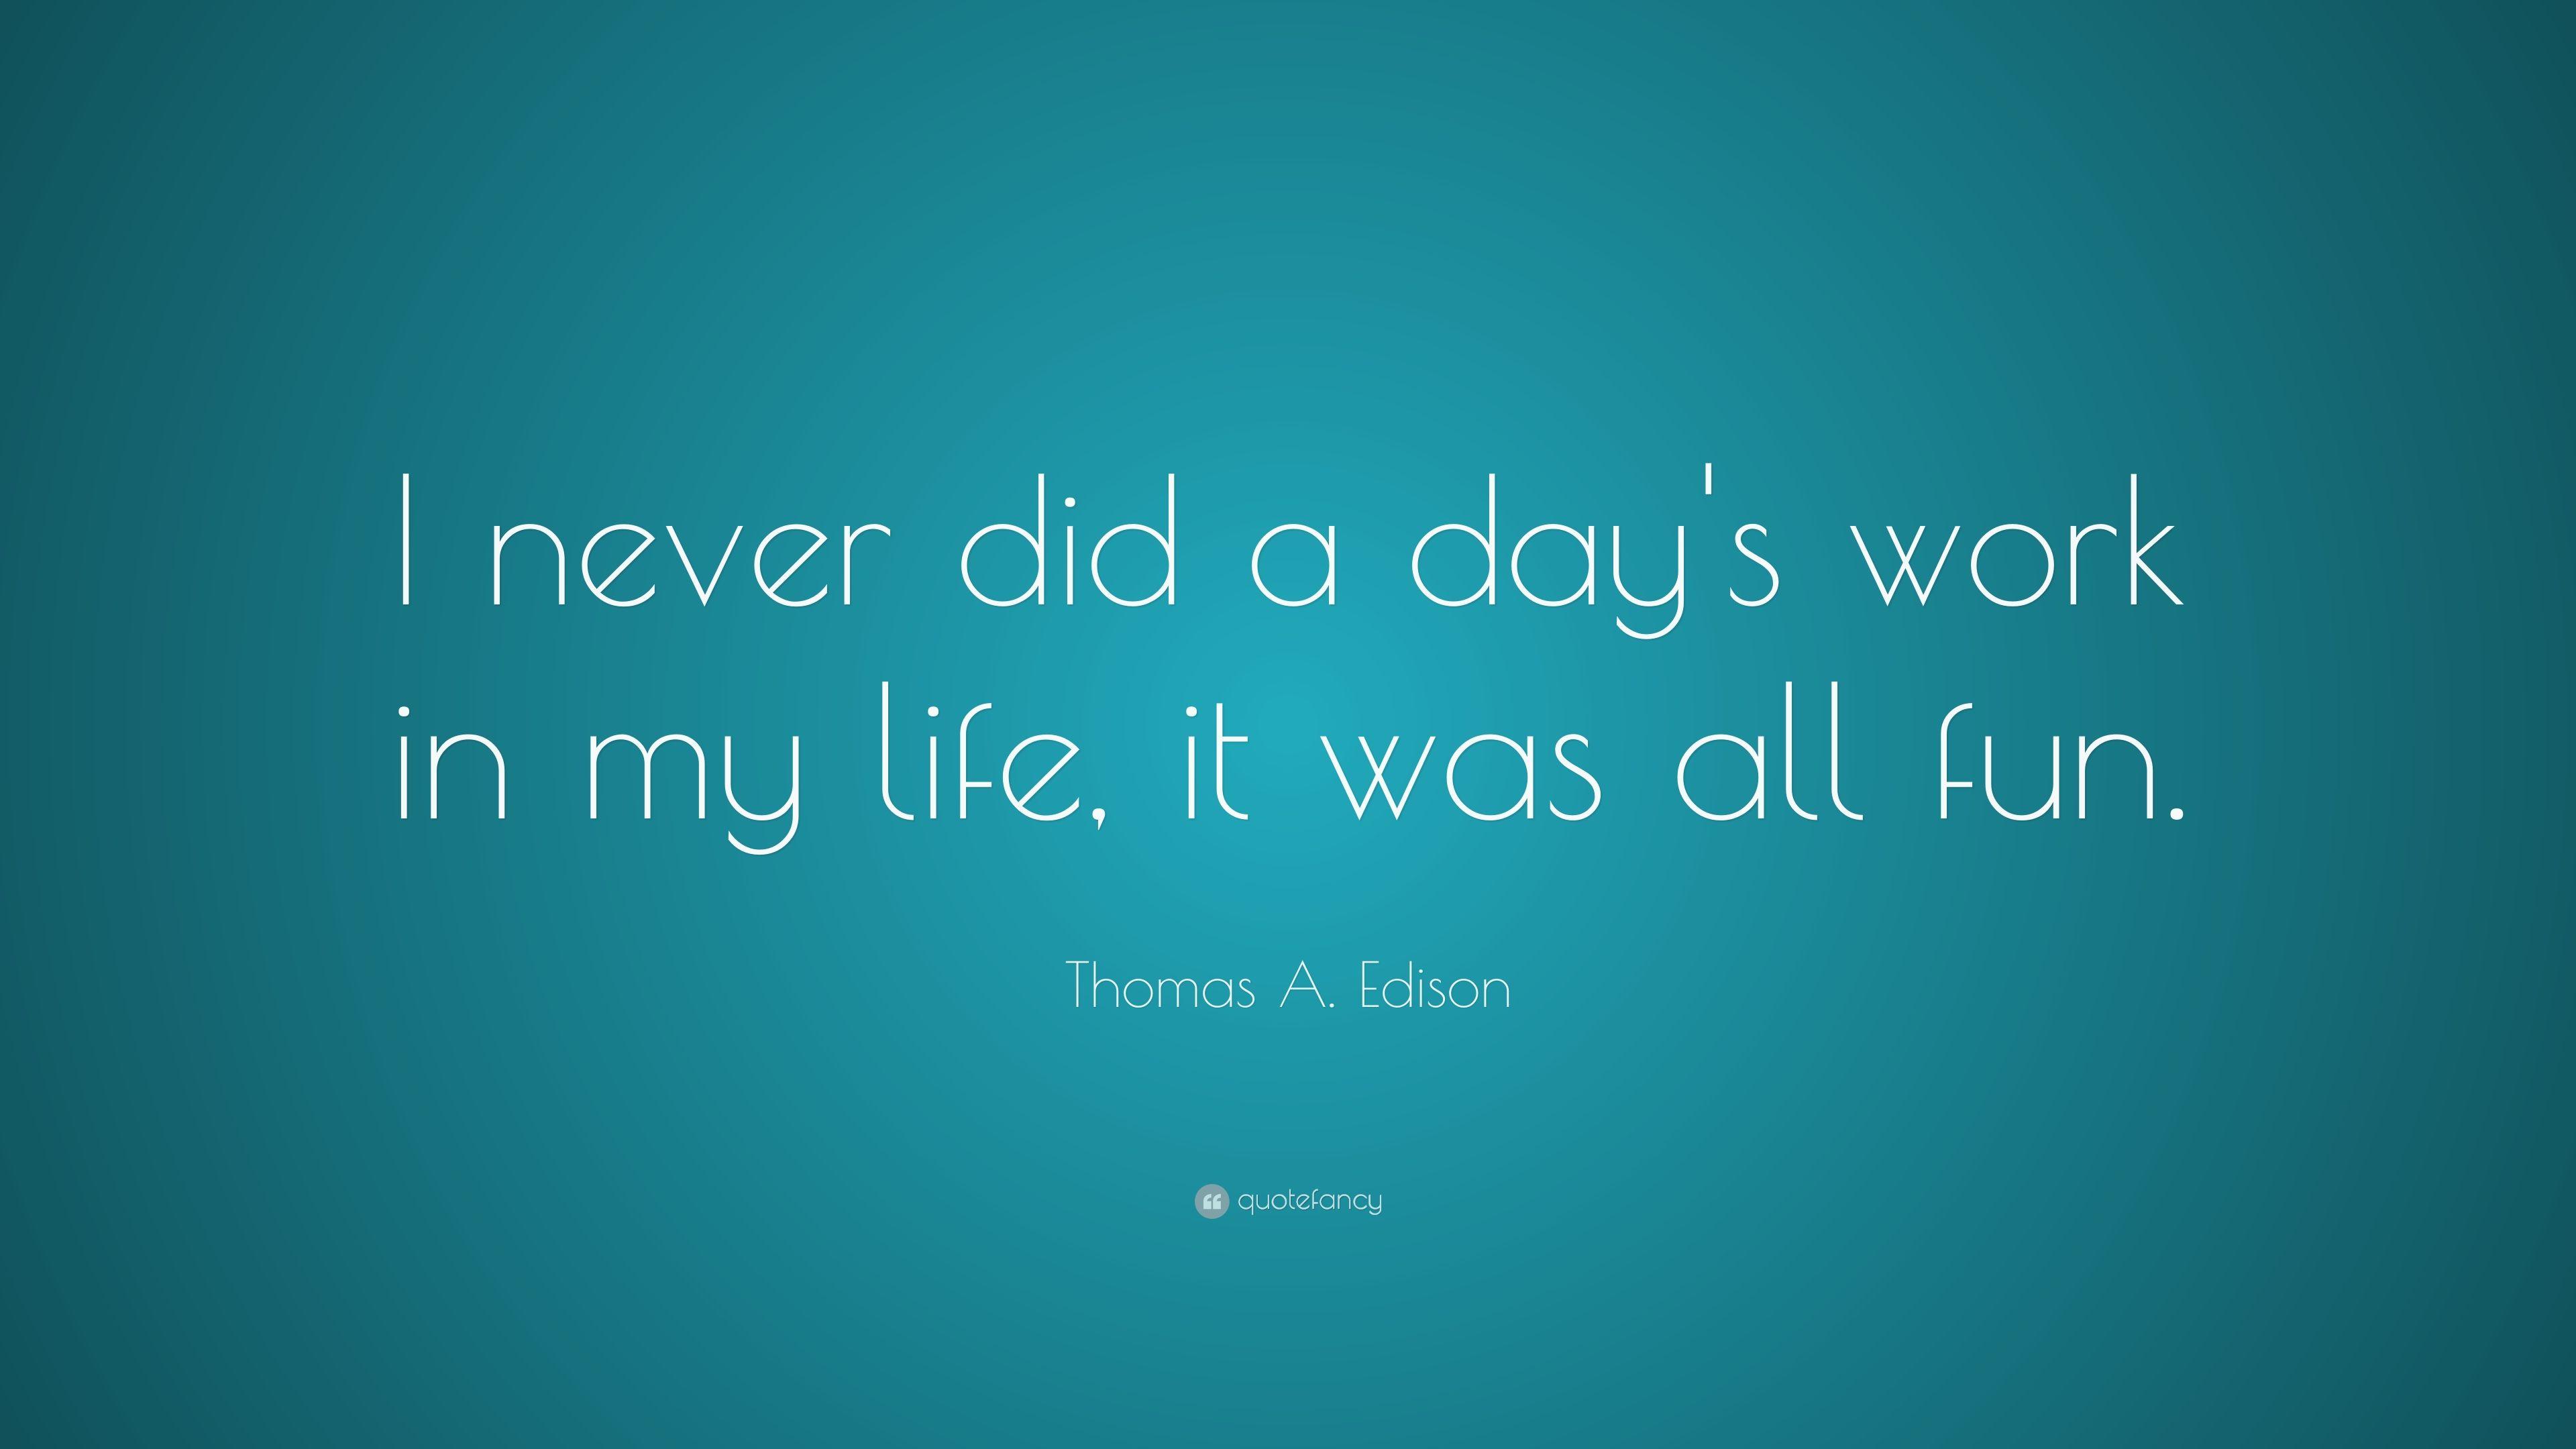 Thomas A. Edison Quote: “I never did a day's work in my life, it